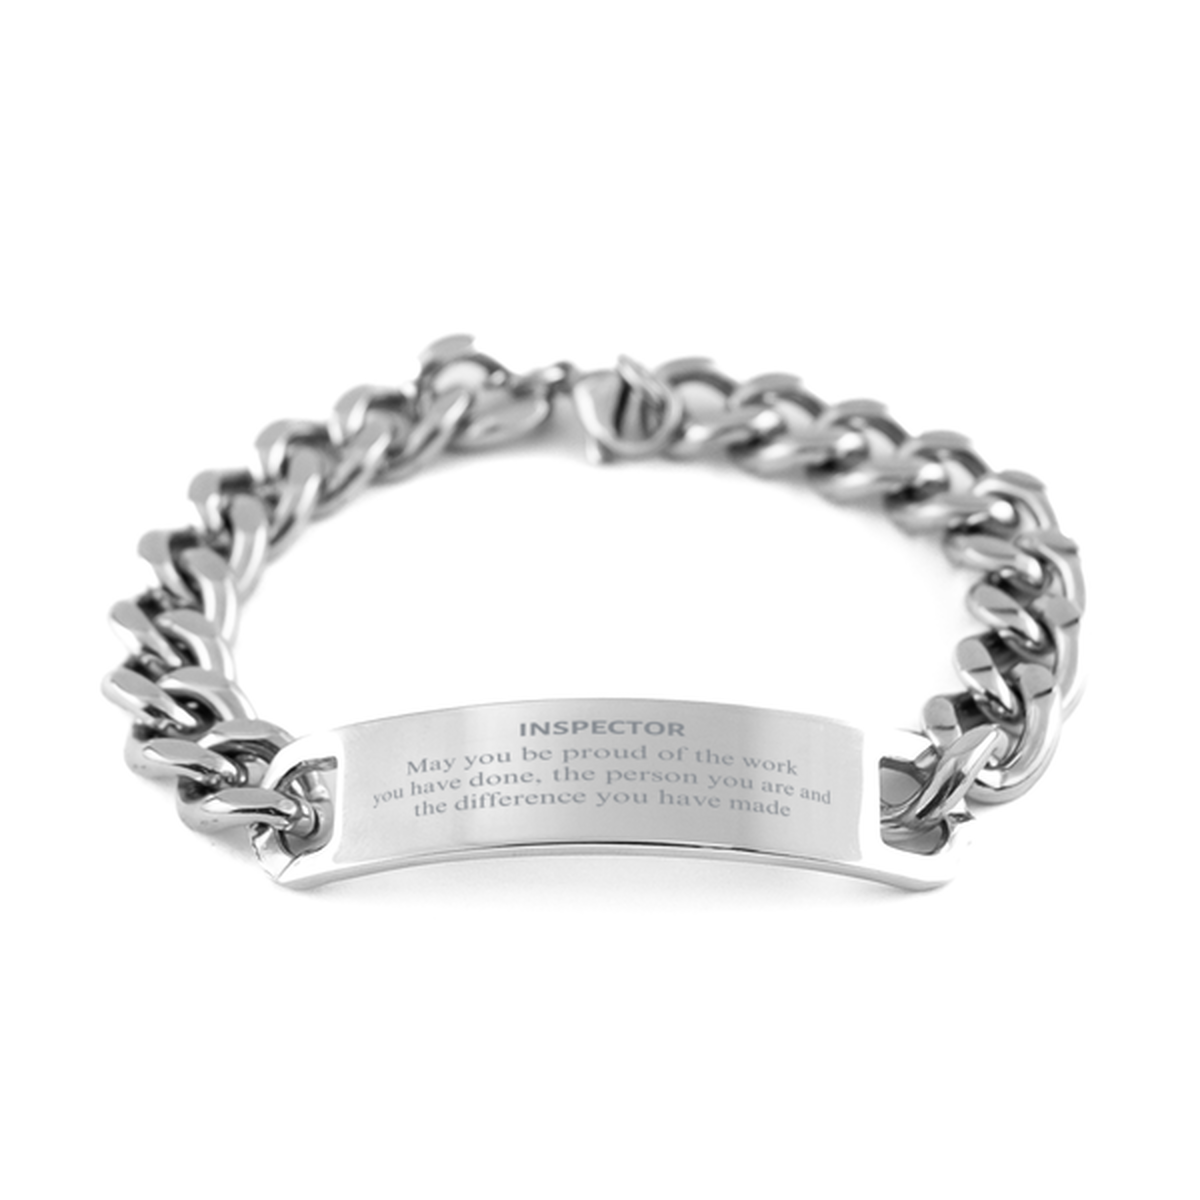 Inspector May you be proud of the work you have done, Retirement Inspector Cuban Chain Stainless Steel Bracelet for Colleague Appreciation Gifts Amazing for Inspector